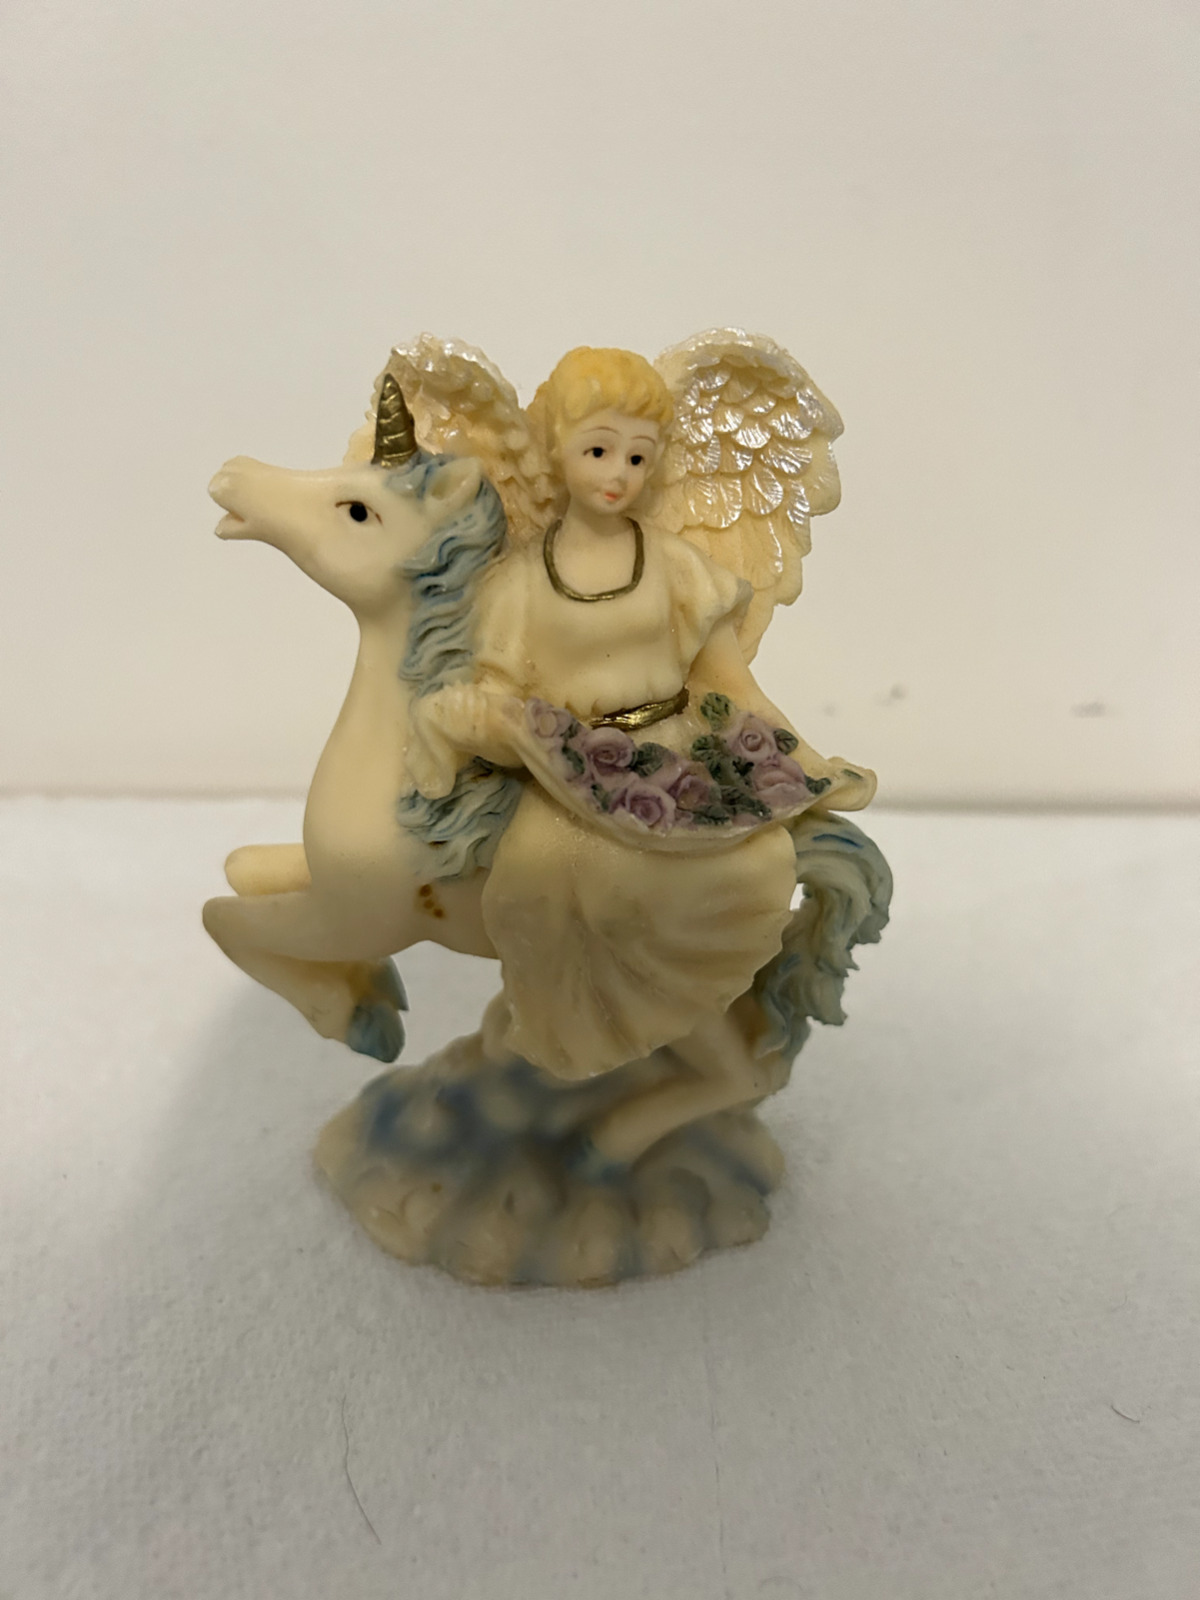 K's COLLECTION HEAVENLY ANGELS FIGURINE